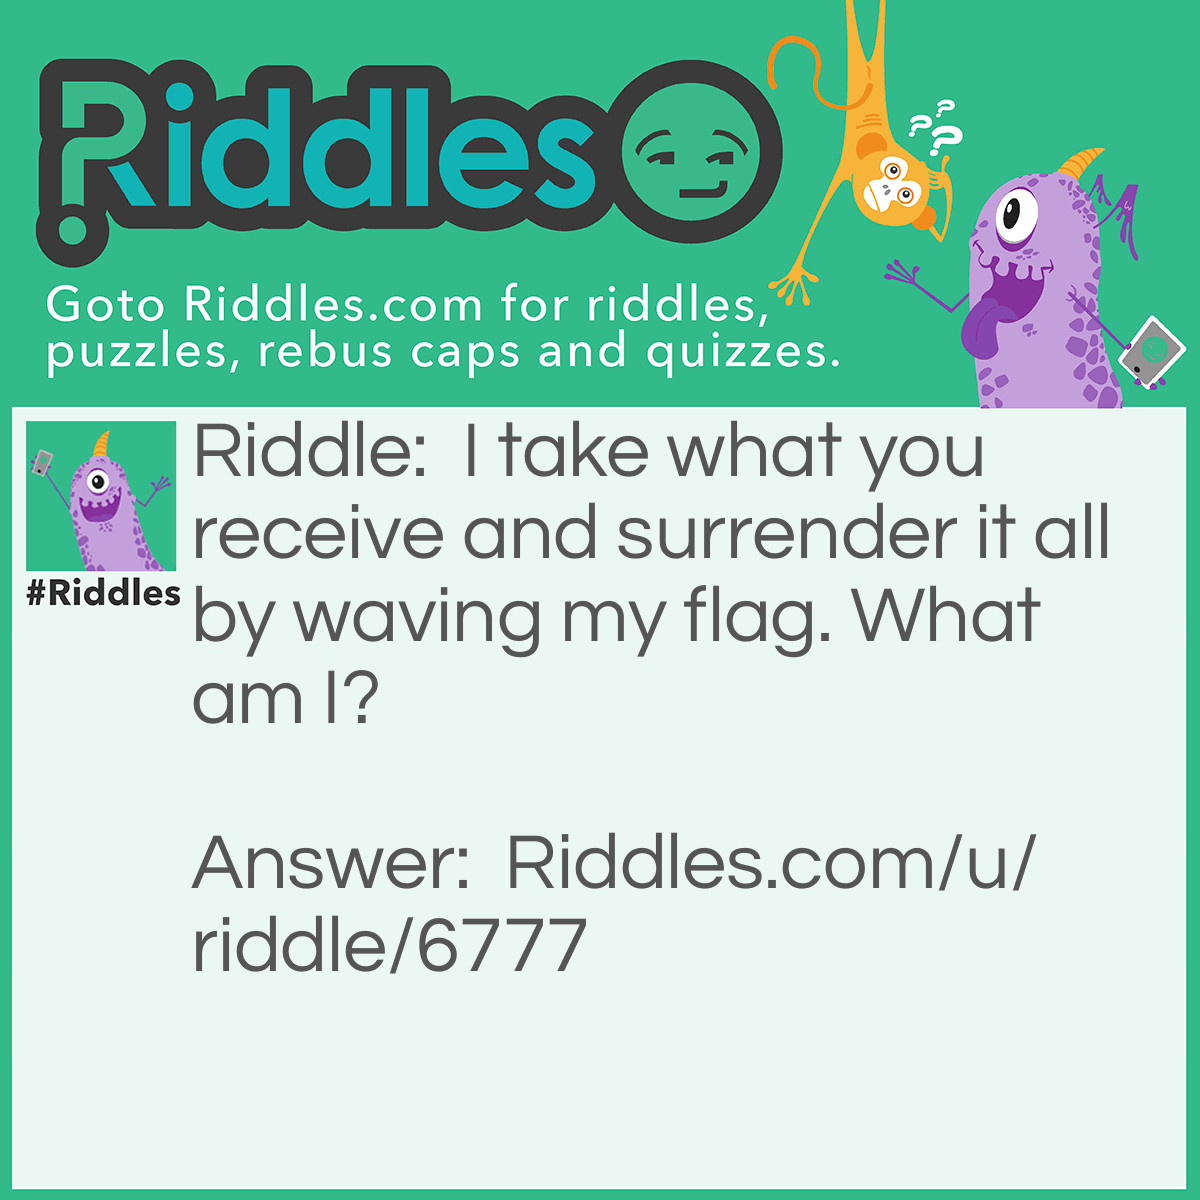 Riddle: I take what you receive and surrender it all by waving my flag. What am I? Answer: A mailbox.